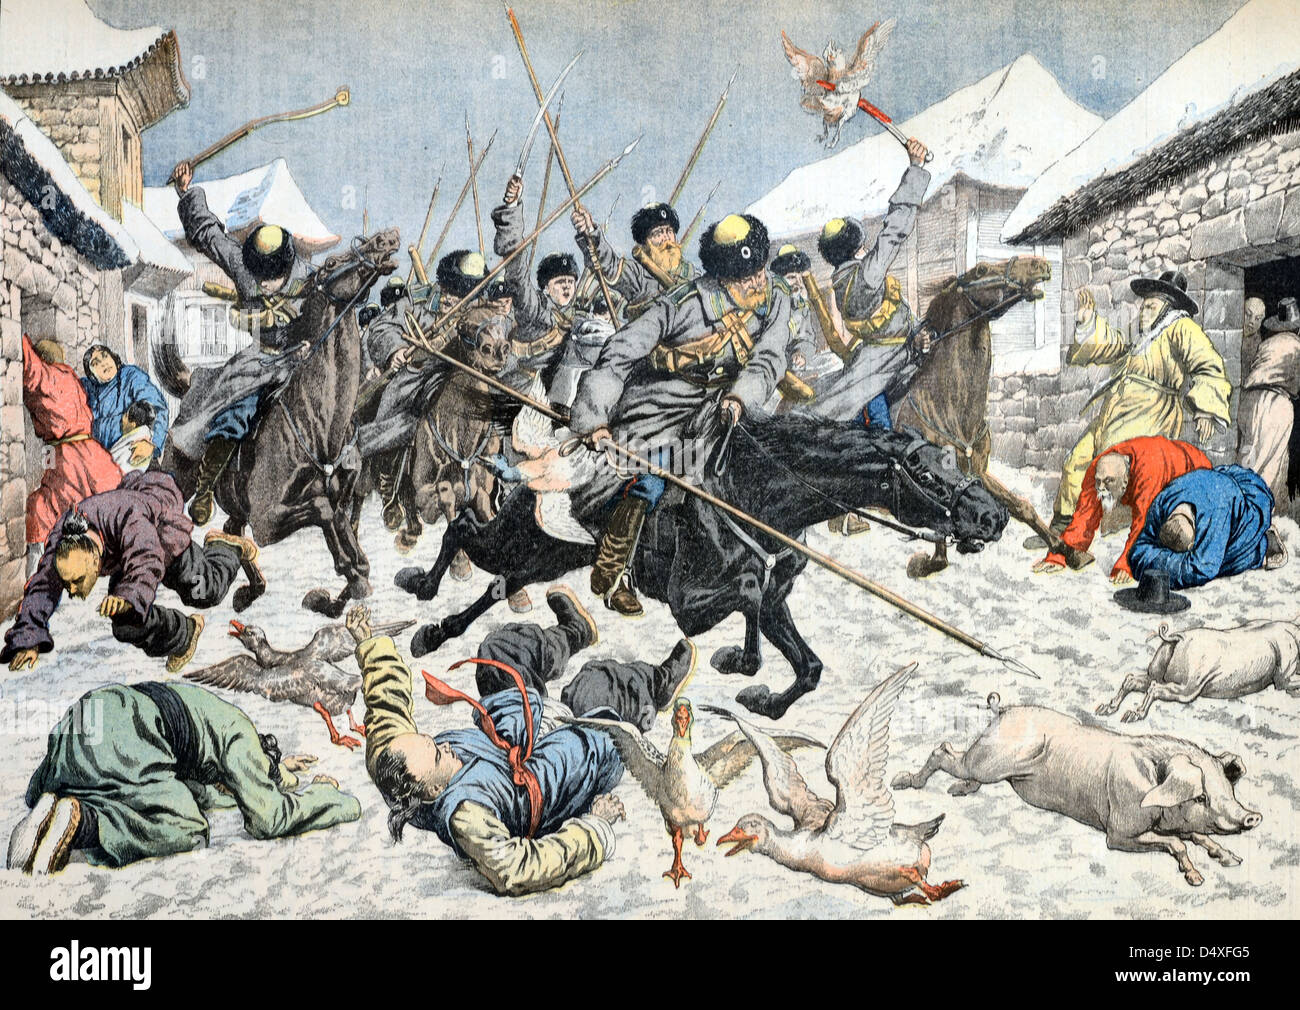 Vintage Illustration of Cossacks, Cossack Soldiers or Cavalry Attacking Korean Village during the Russo-Japanese War (March 1904) Stock Photo